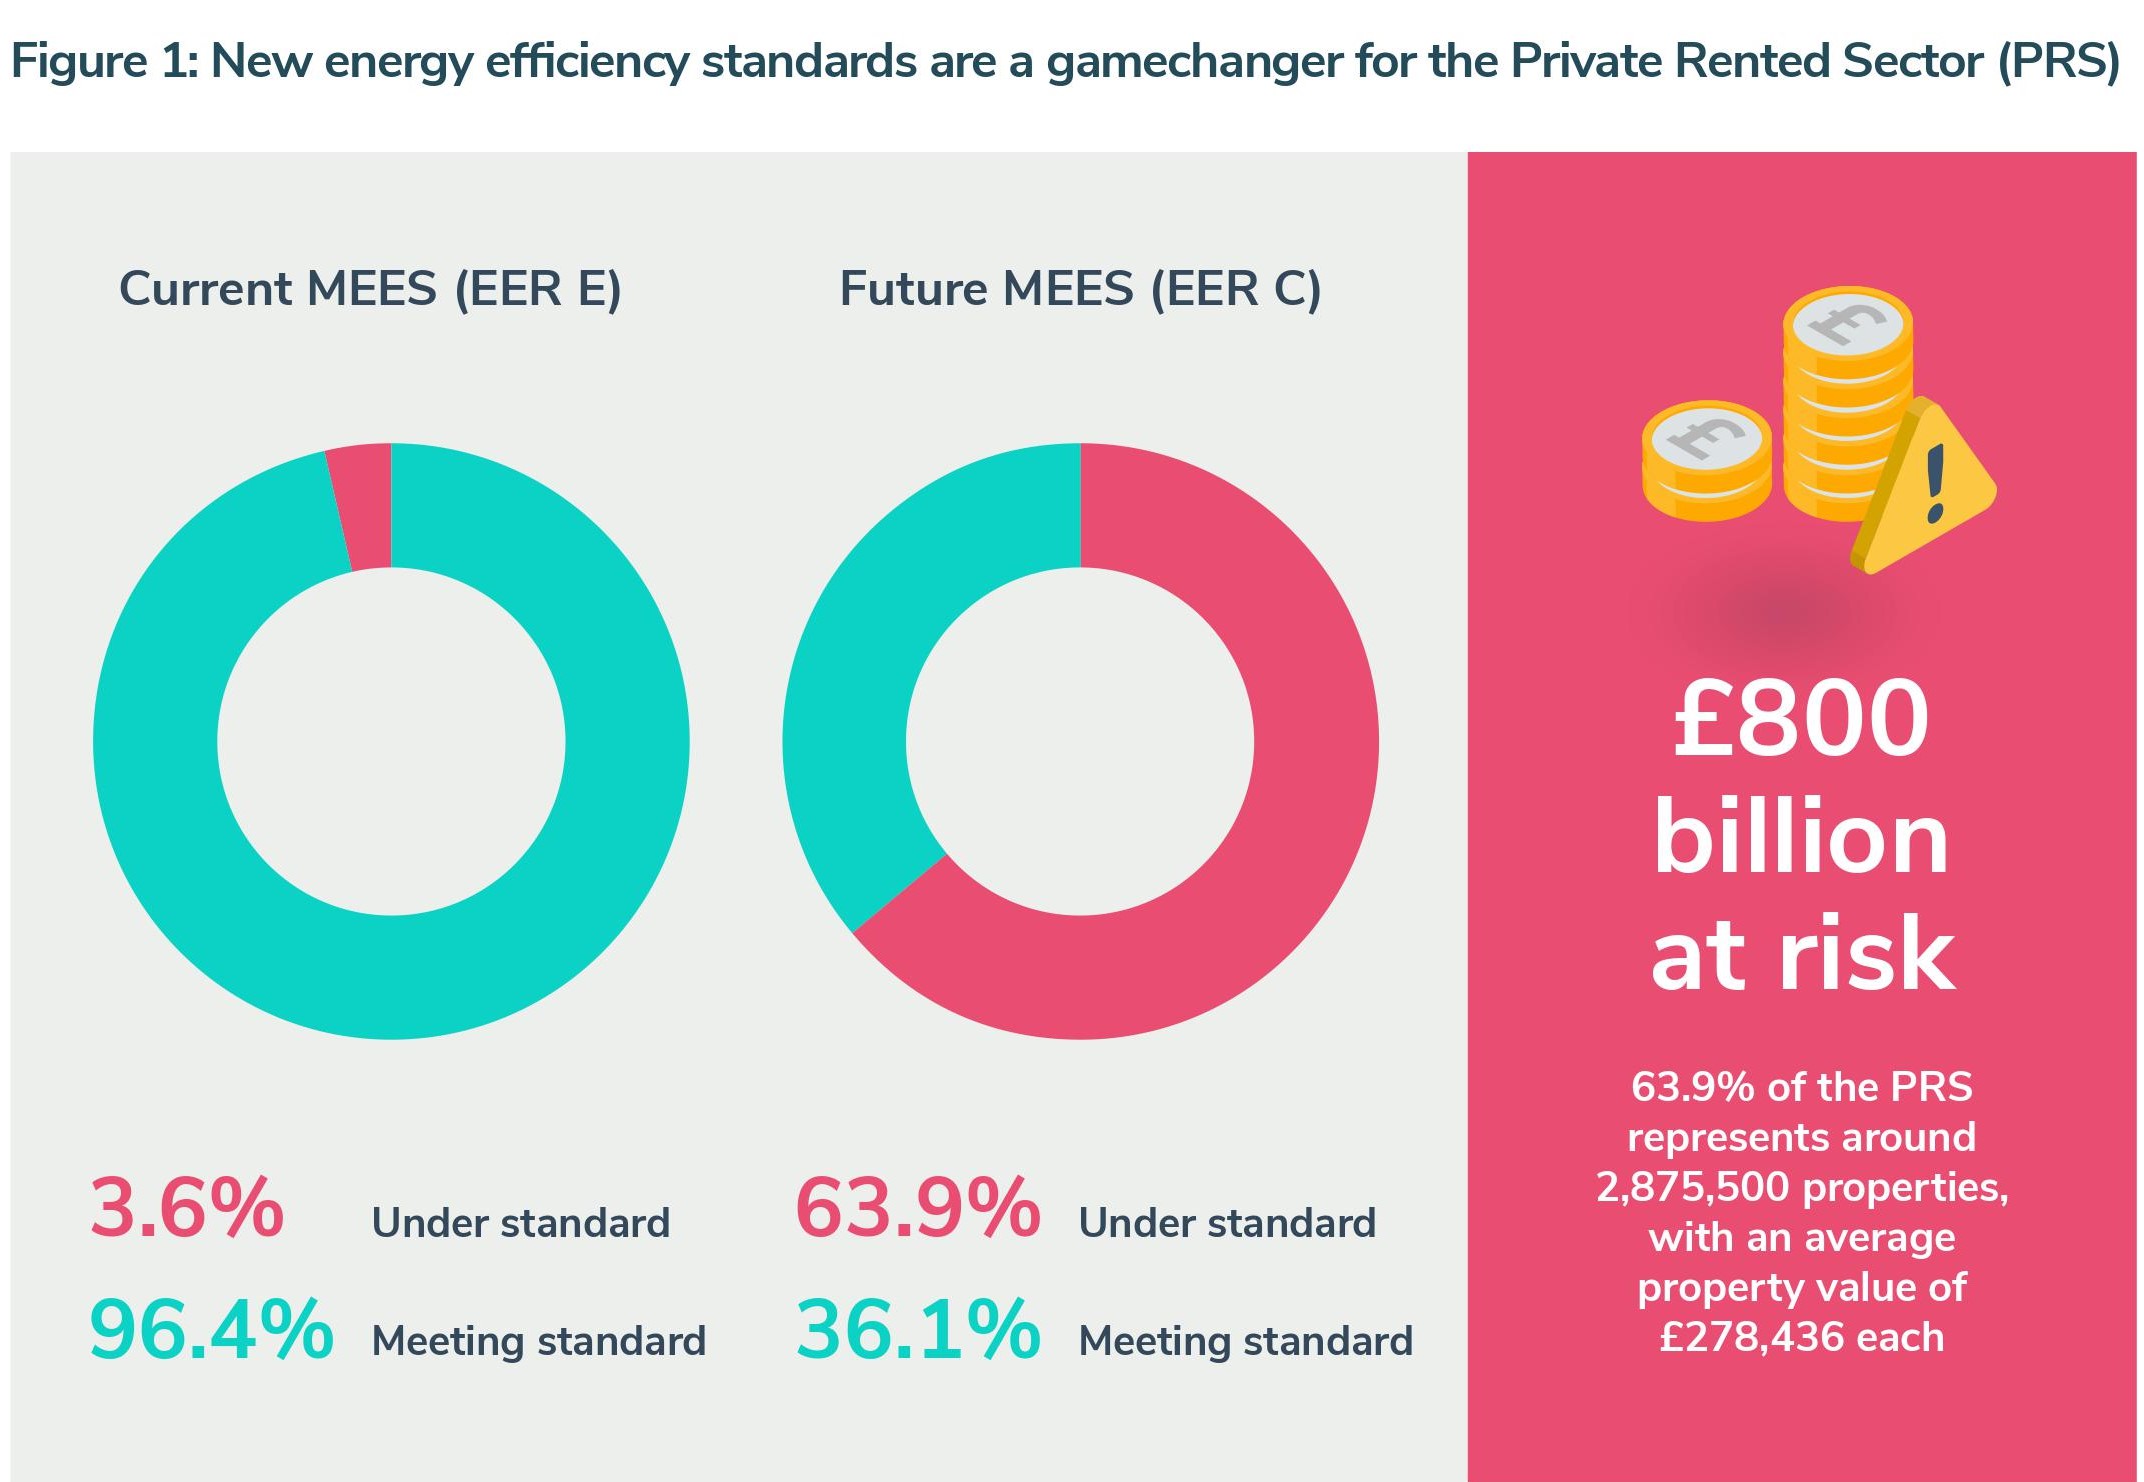 Figure 1: New energy efficiency standards (MEES) will change the game for the private rented sector, putting £800 billion worth of property investment at risk.